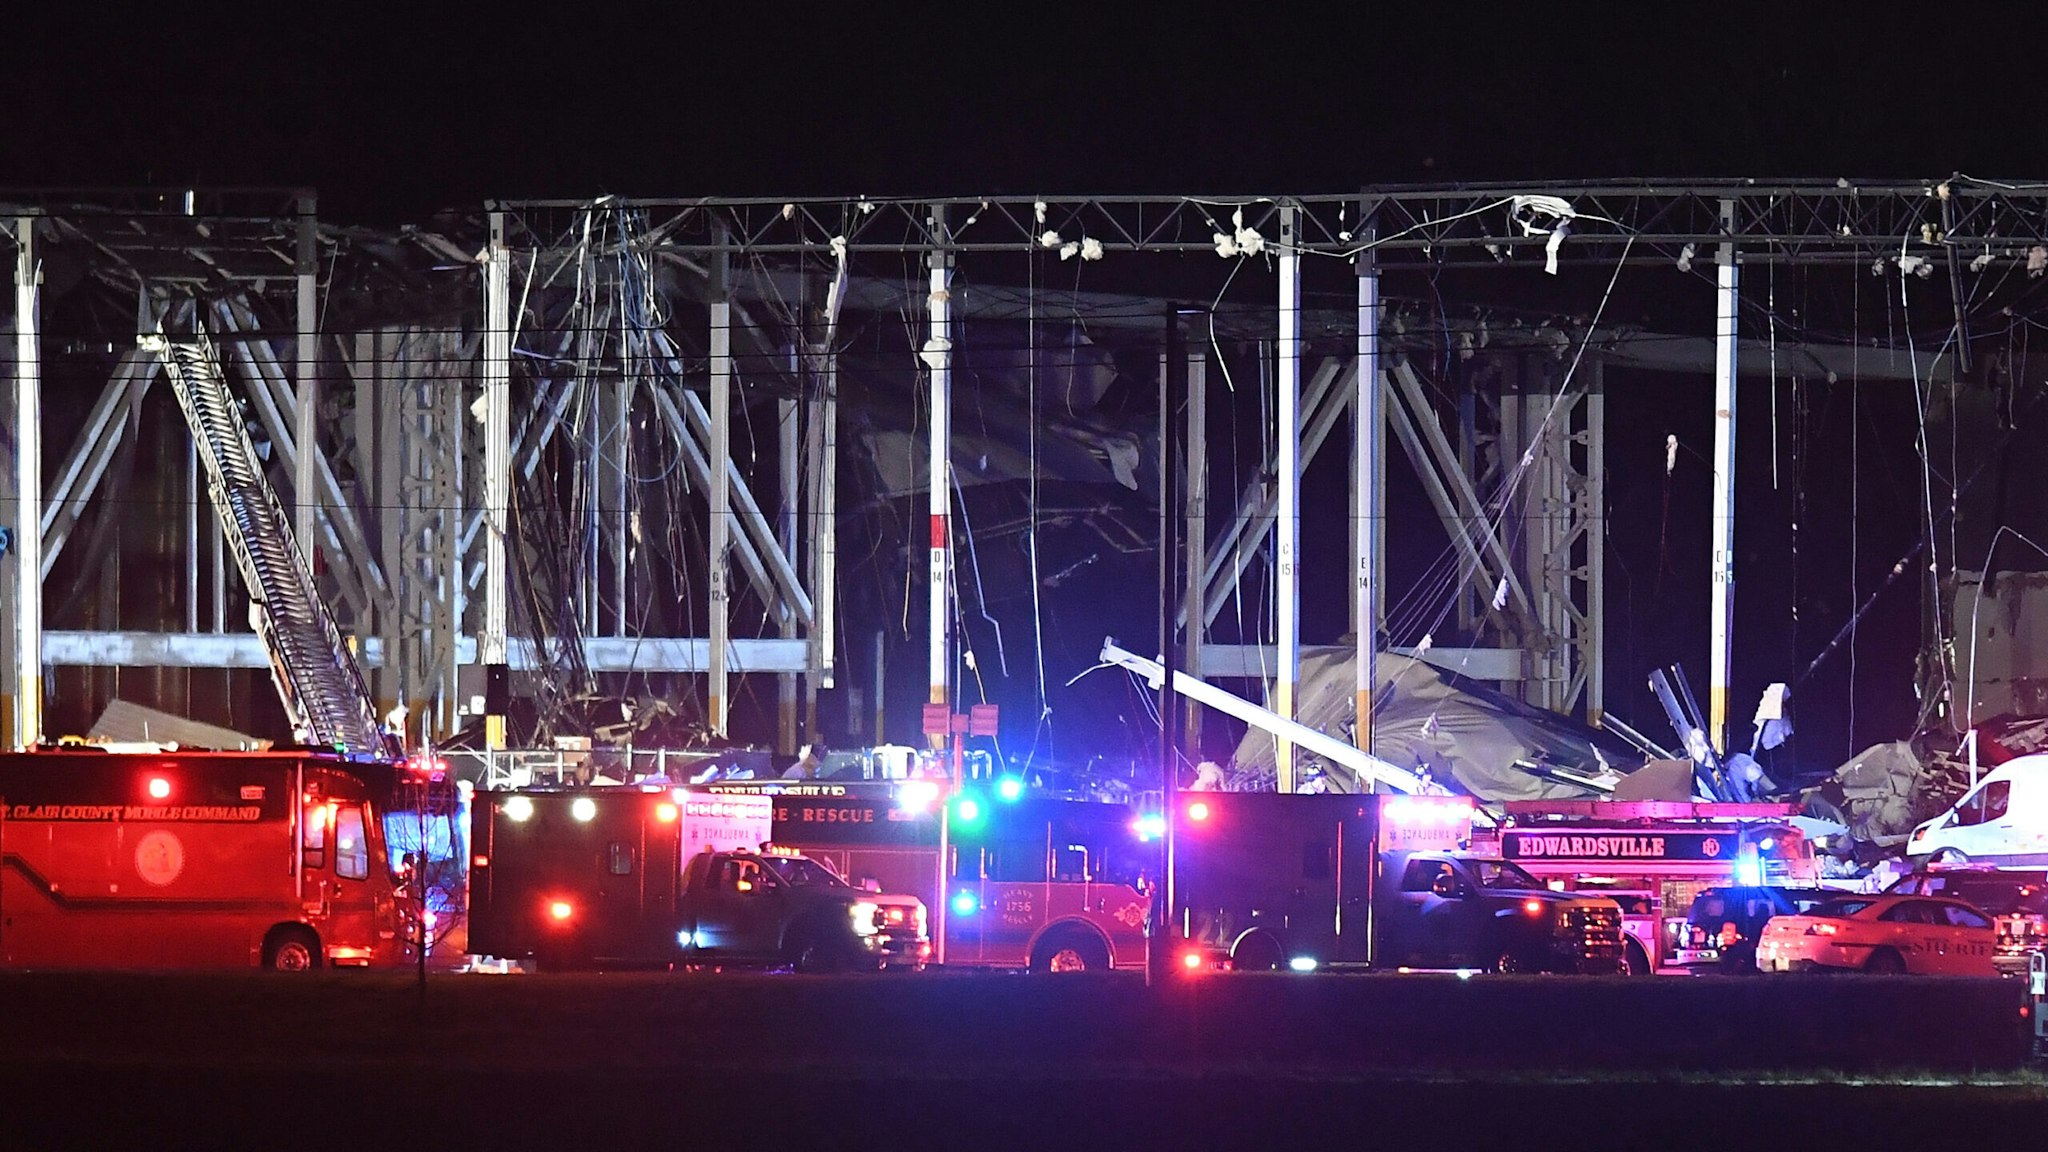 EDWARDSVILLE, IL - DECEMBER 10: First responders surround a damaged Amazon Distribution Center on December 10, 2021 in Edwardsville, Illinois. According to reports, the Distribution Center was struck by a tornado Friday night. Emergency vehicles arrived to start rescue operations for workers believed to be trapped inside.